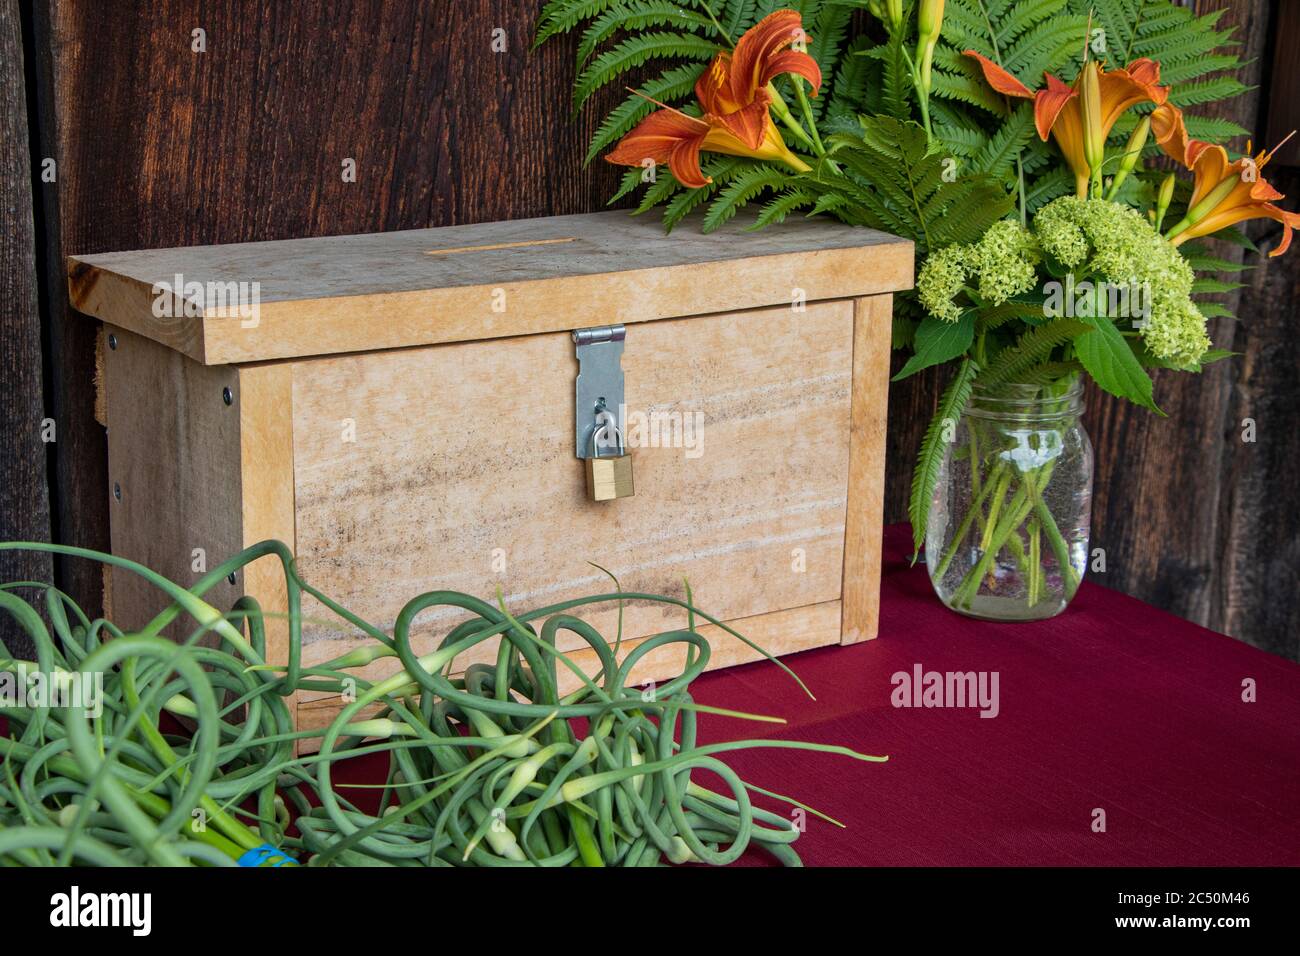 A self-serve farm stand with a wooden money cash box, garlic scapes, honor system, roadside, honesty, buying Stock Photo